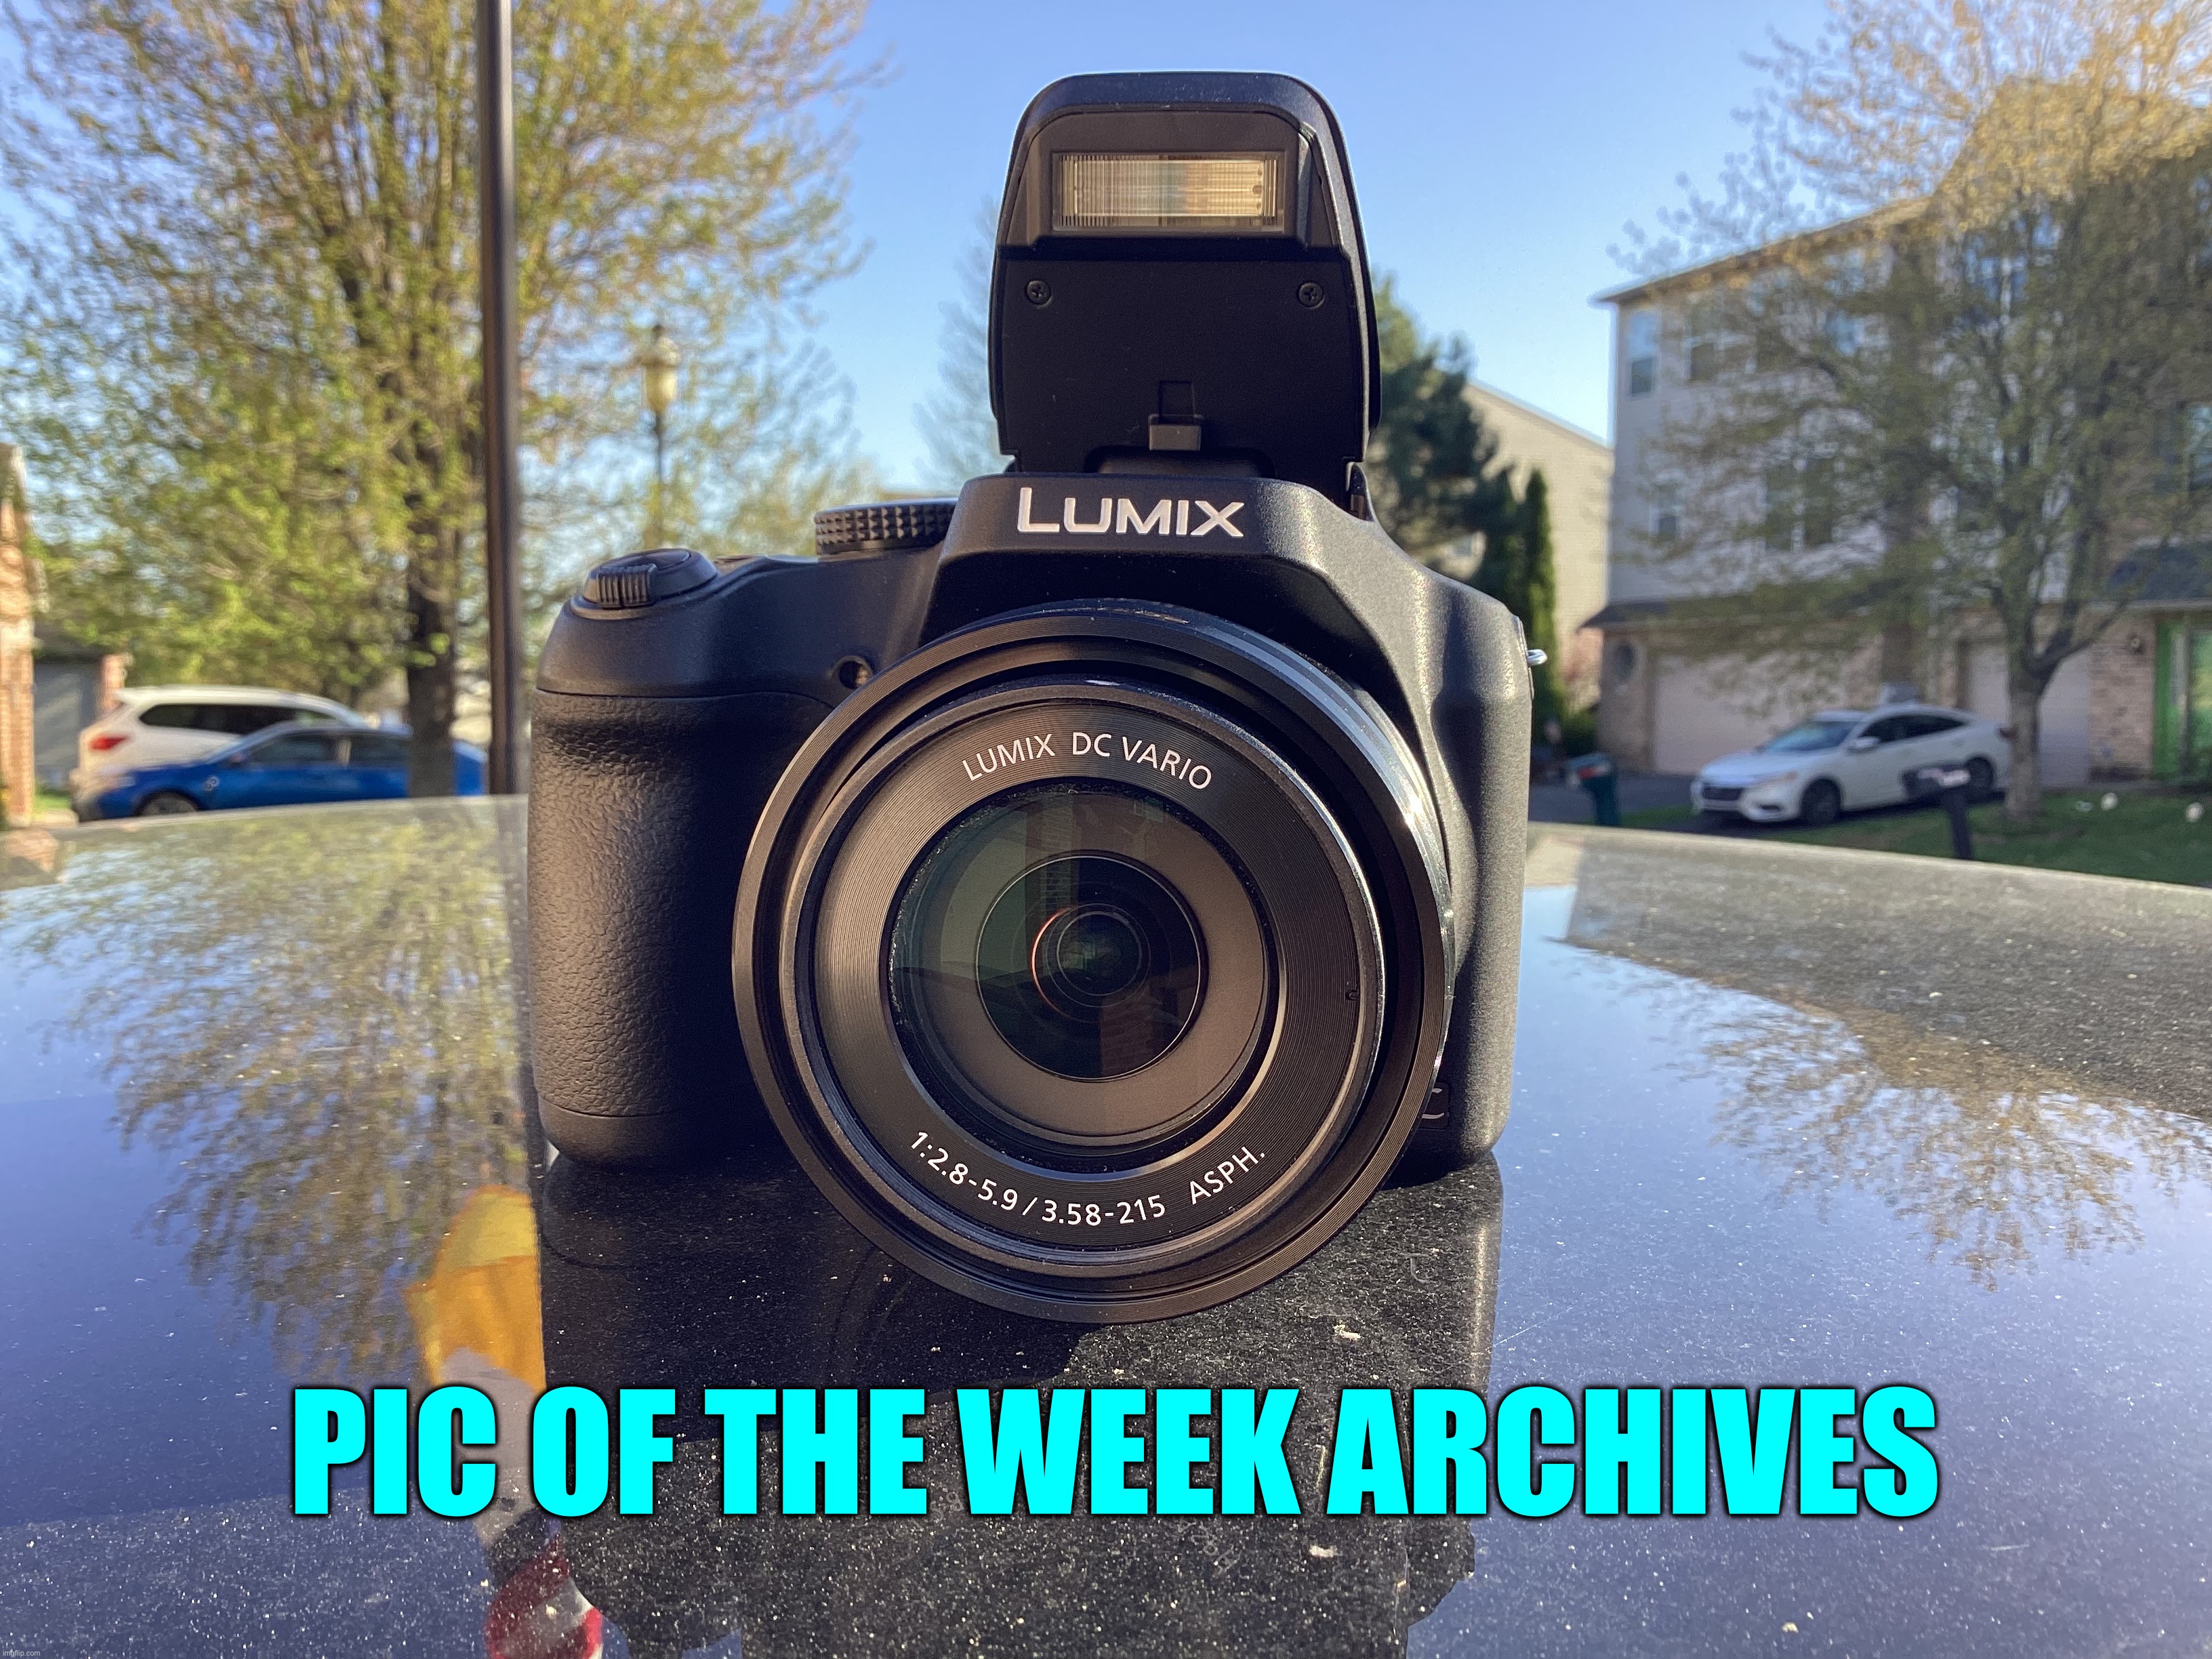 Photos for Pic of the Week will be posted here each Monday. (Non pic of the week award comments will be deleted by Iceu) | PIC OF THE WEEK ARCHIVES | image tagged in share your own photos,archives | made w/ Imgflip meme maker